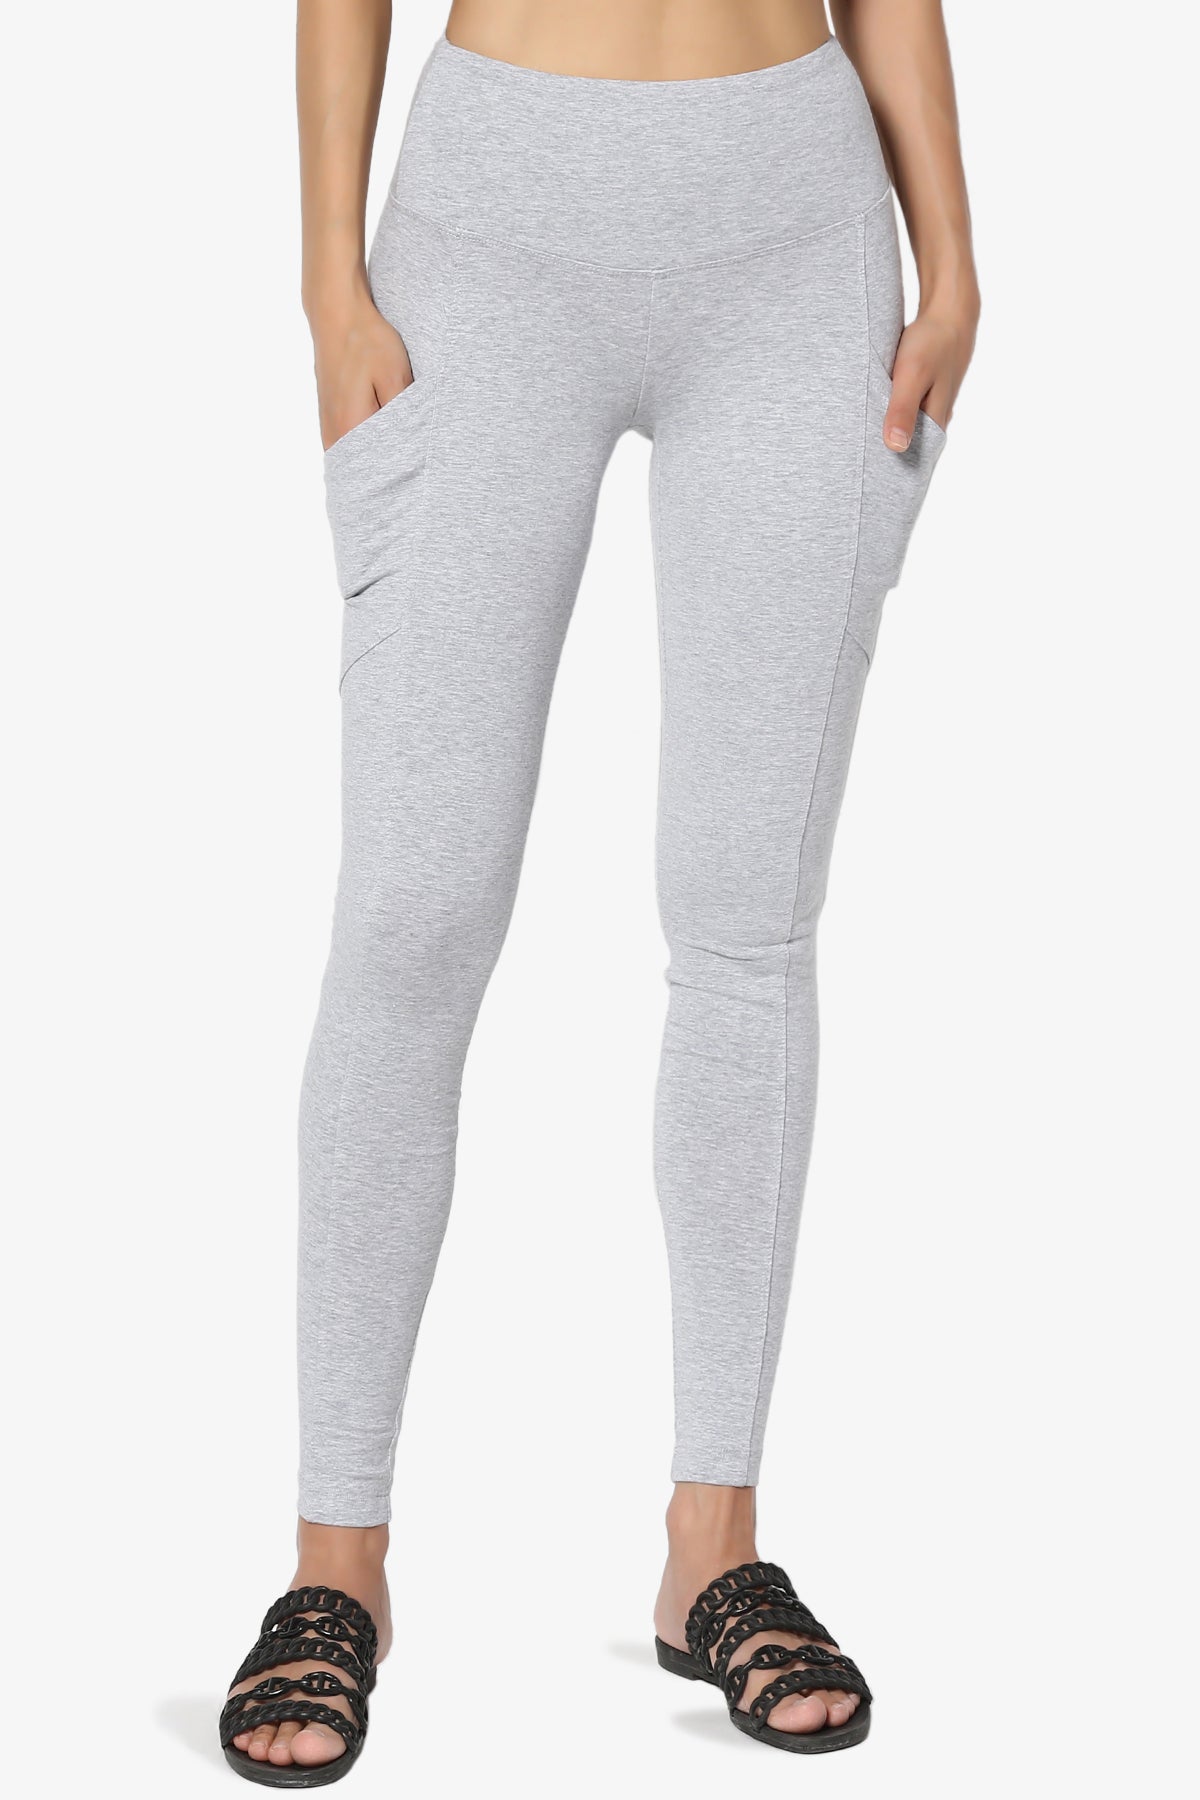 Ansley Luxe Cotton Leggings with Pockets HEATHER GREY_3